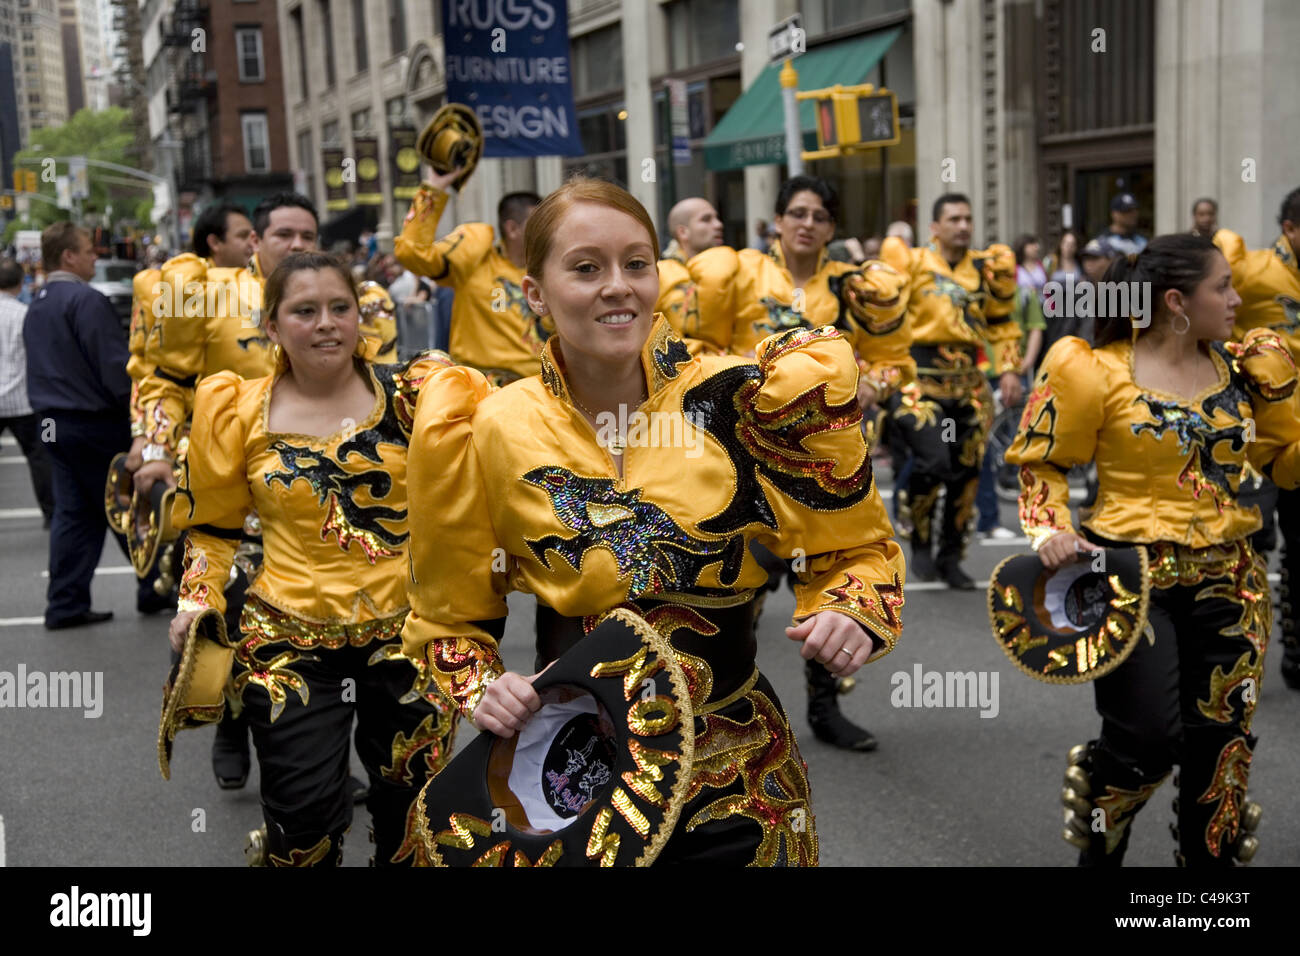 Anuual New York City Dance Parade along Broadway in New York City. Stock Photo